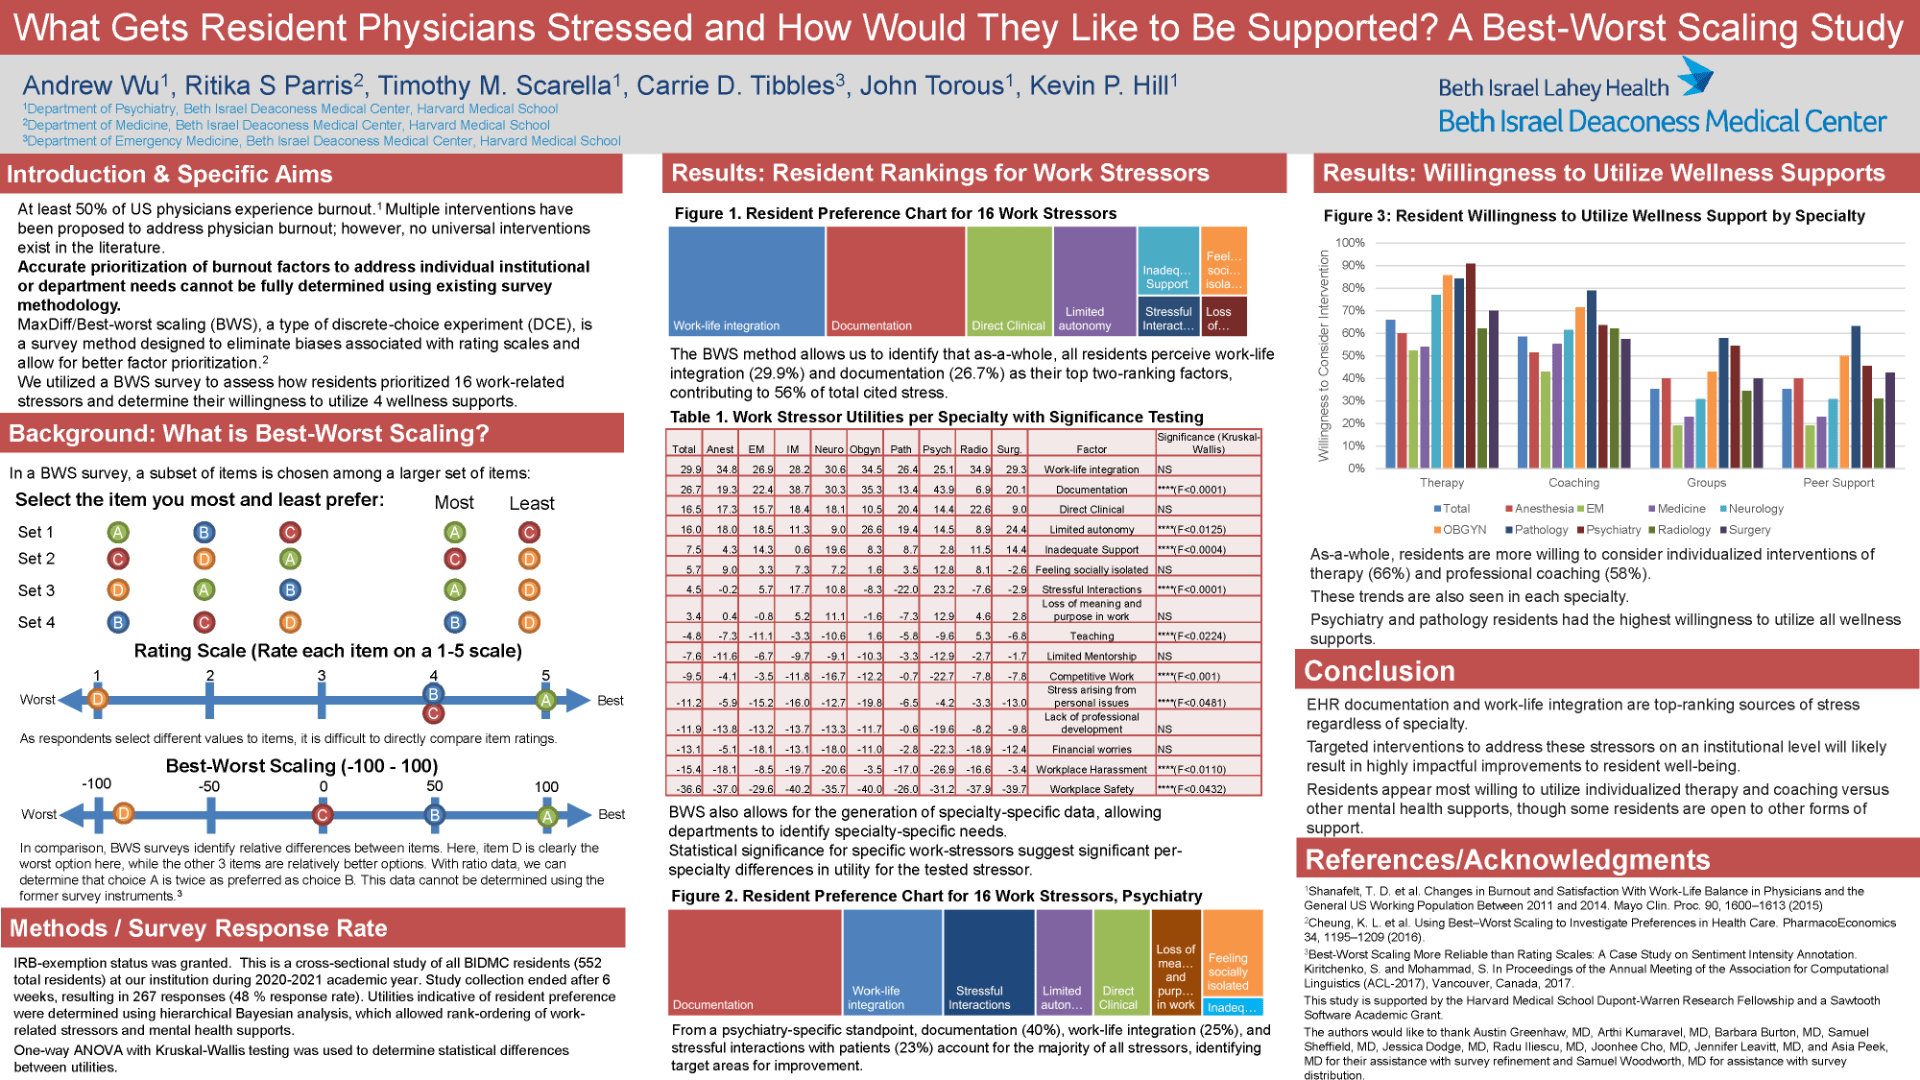 What Gets Resident Physicians Stressed and How Would They Like to Be Supported? A Best-Worst Scaling Study